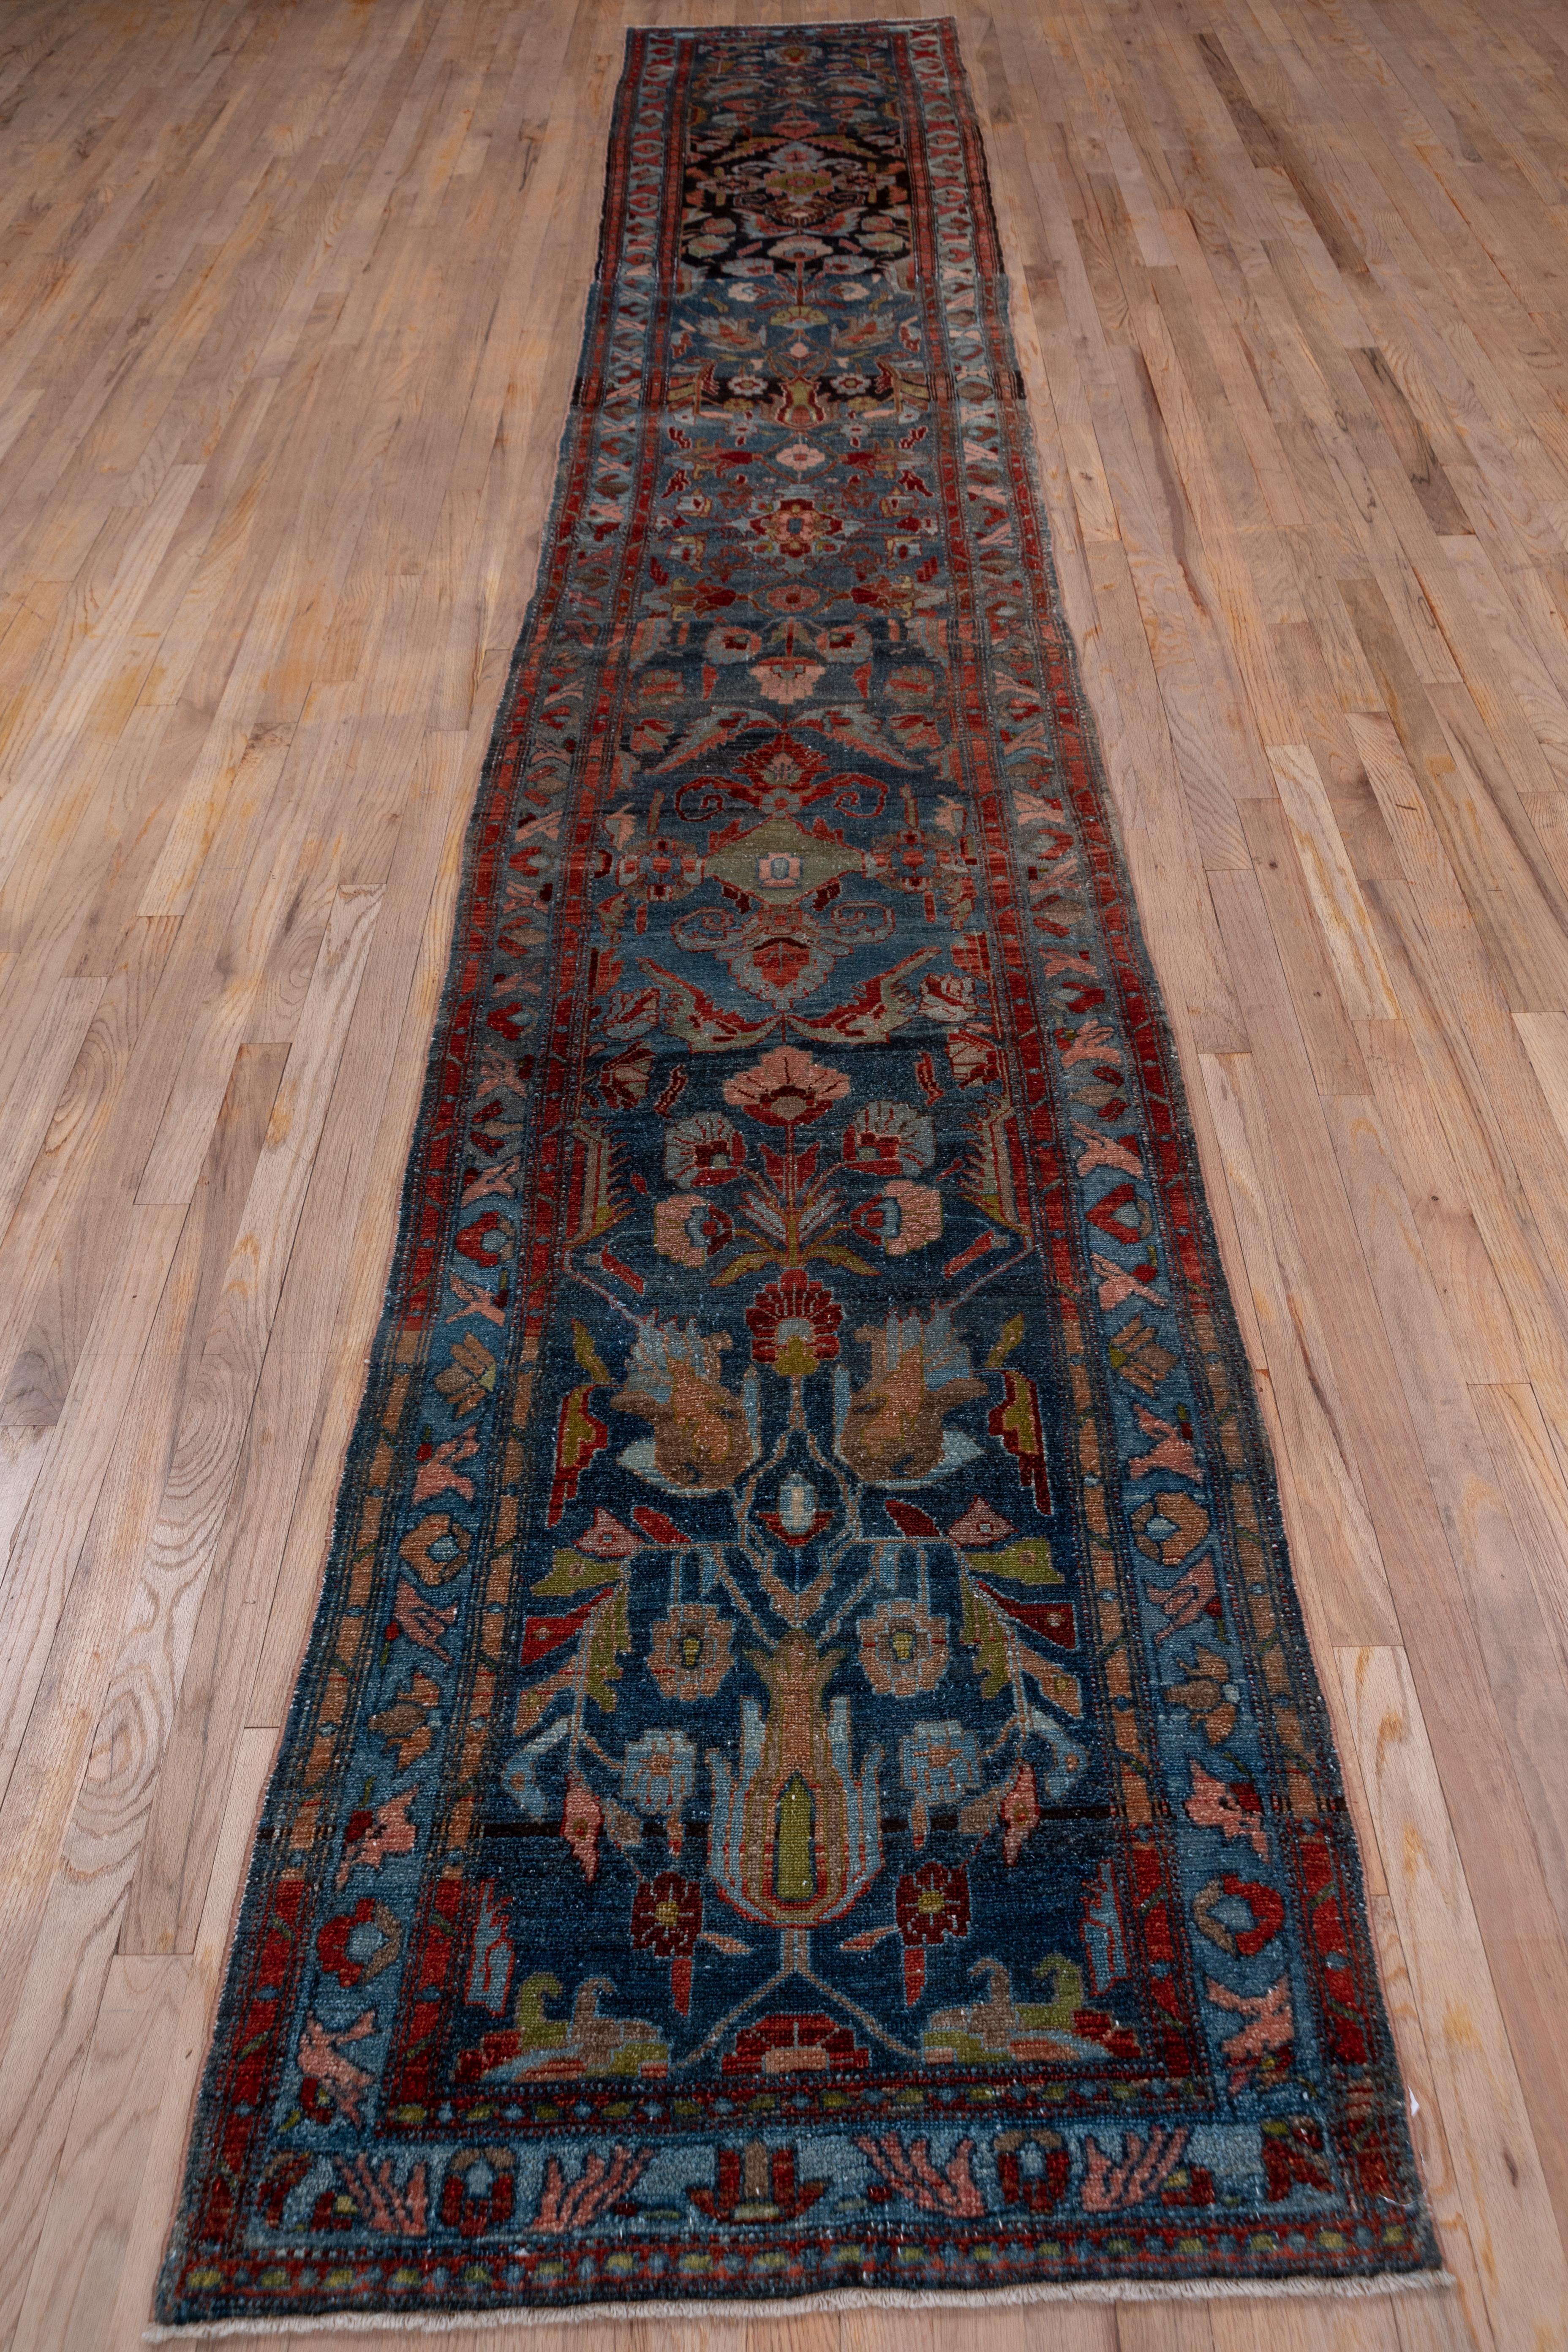 This rather flat west Persian runner displays an abrashed green to deep blue-green field with a giant flower and leaf pattern in dark brown, light blue, rust and golden-brown. The medium blue border displays a very simple palmette and diagonal leaf